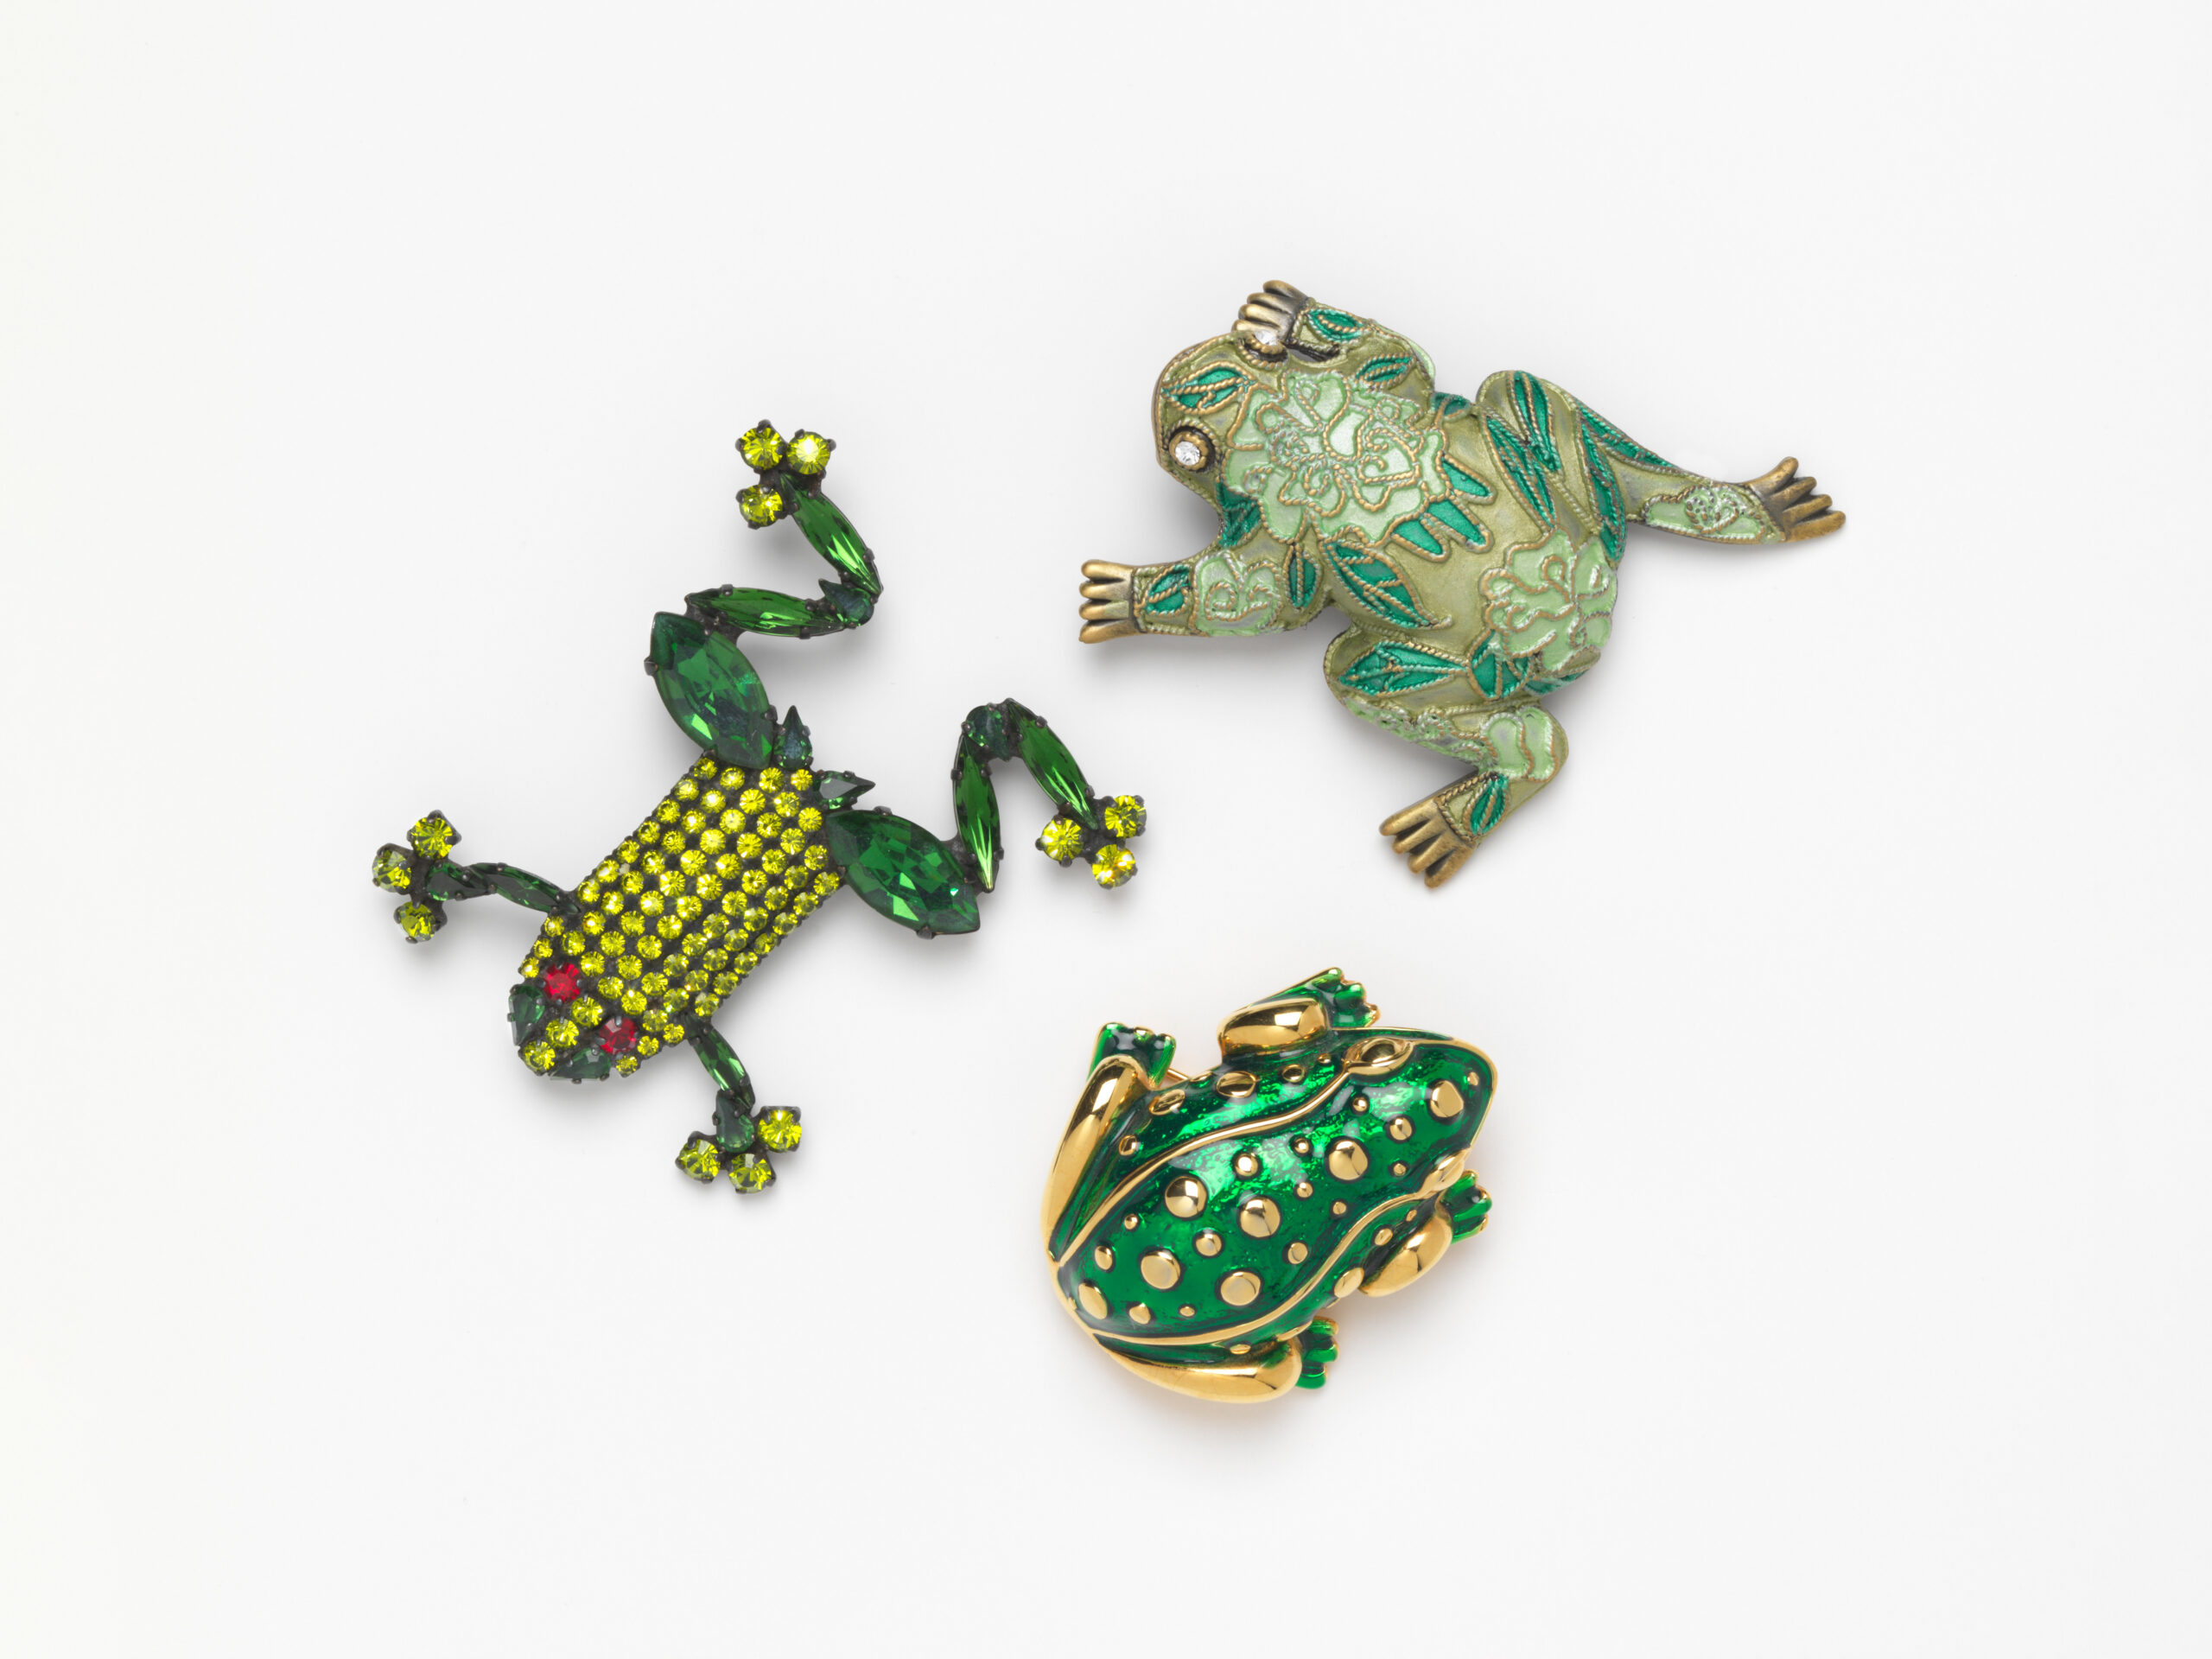 Pin on Snakes, frogs and lizards